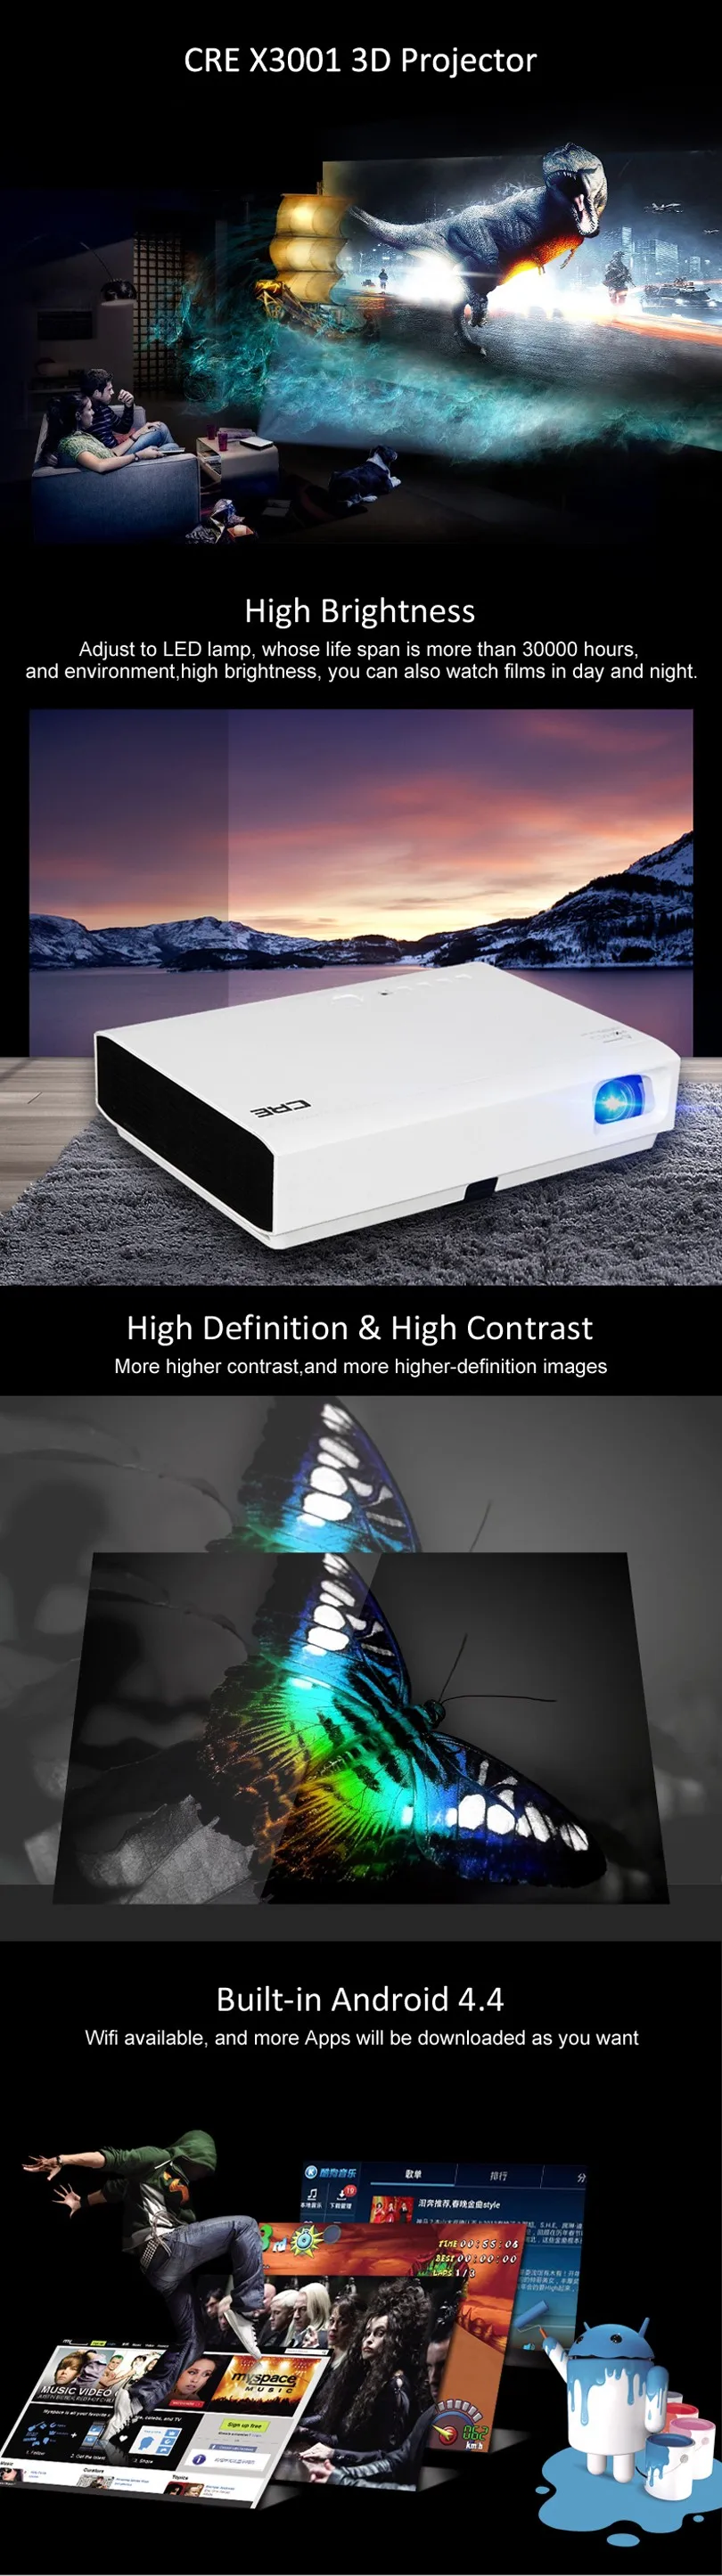 Fashionable Screen Free TV DLP Projector with bright 3000lumen,1280*800 support 1080P 3D projector with 3LED&dlp projector goodee projector